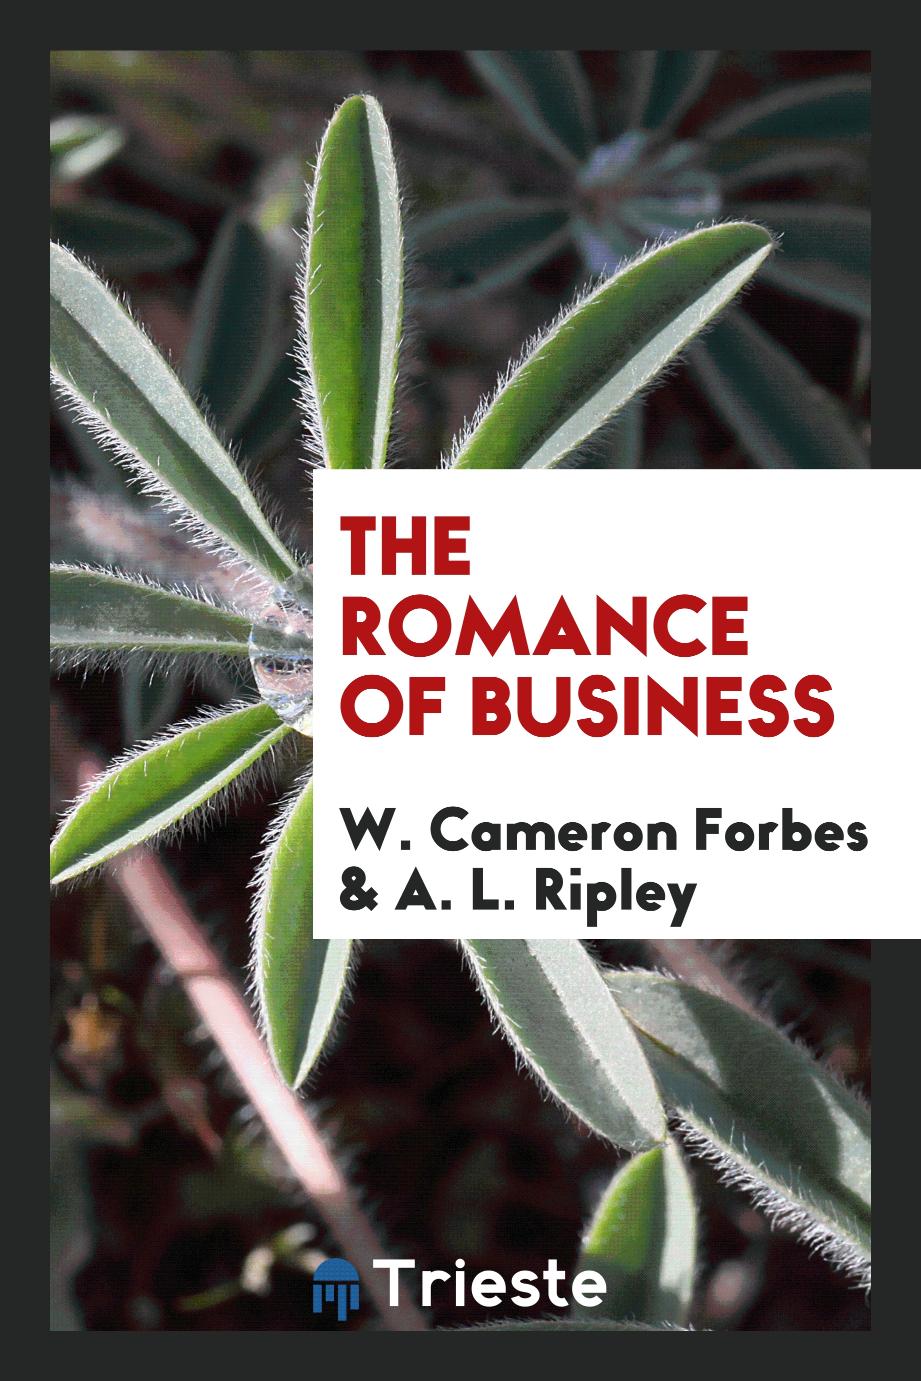 The romance of business